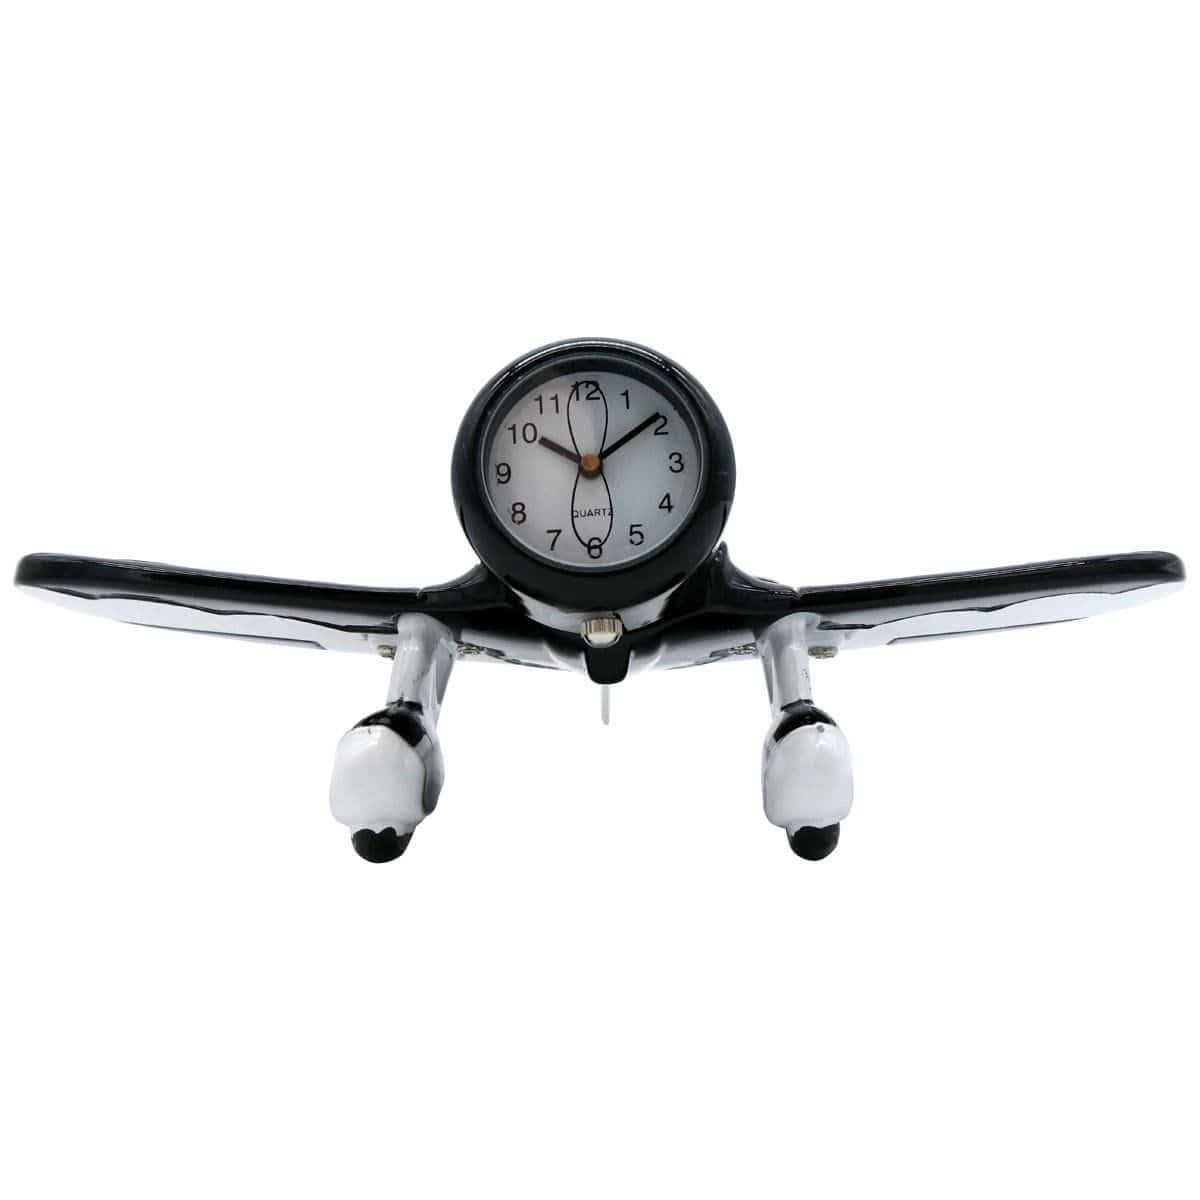 Pilot Toys Black and White Gee Bee Desk Clock